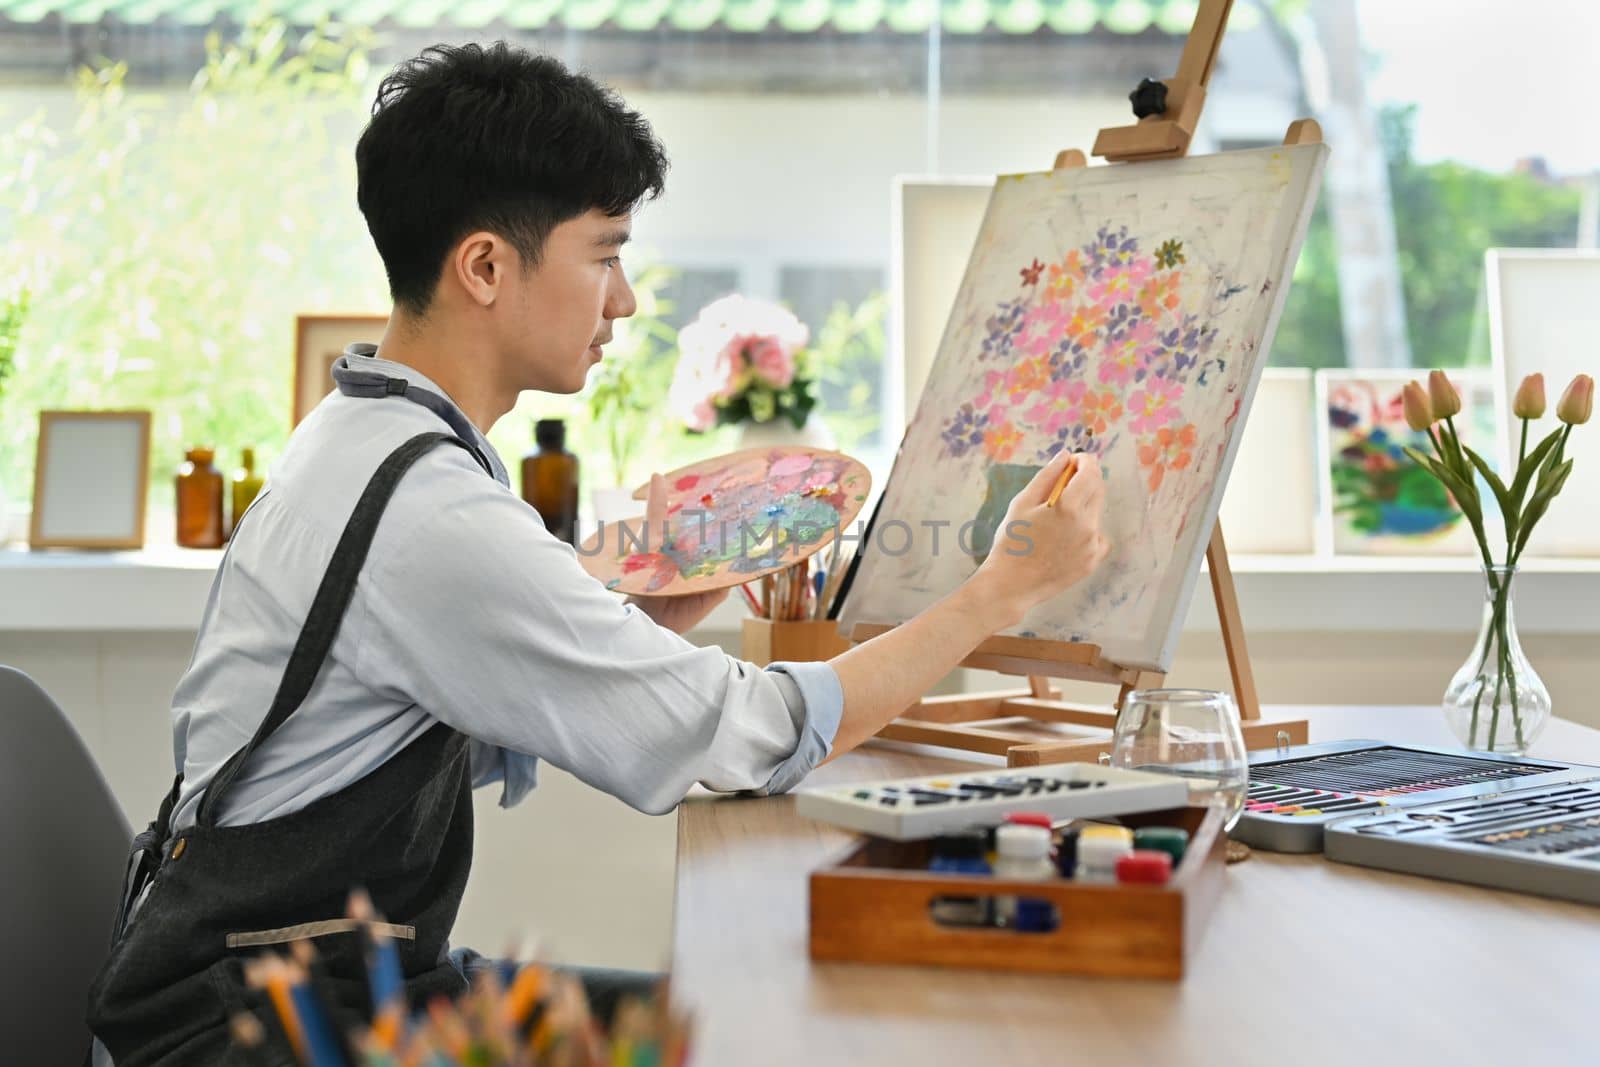 Satisfied man painting on easel with watercolor in comfortable art workshop. Leisure activity and creative hobby concept.